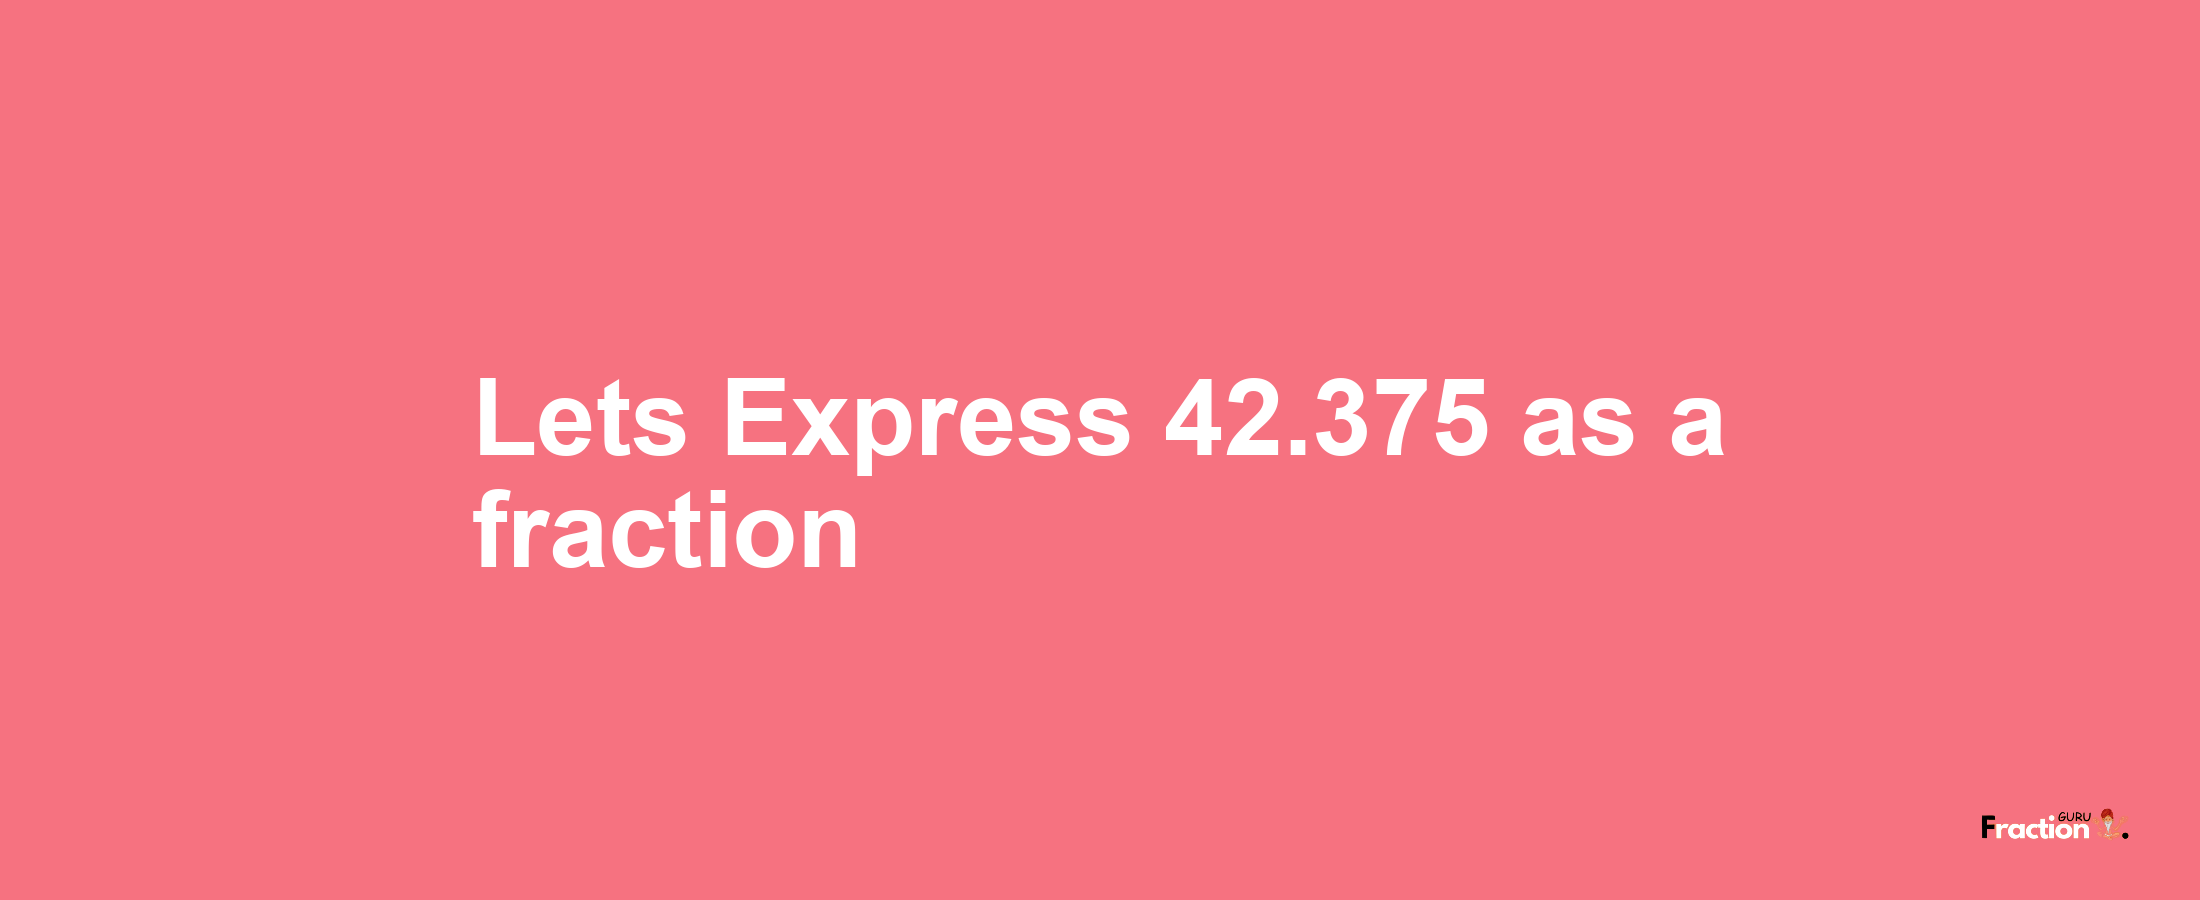 Lets Express 42.375 as afraction